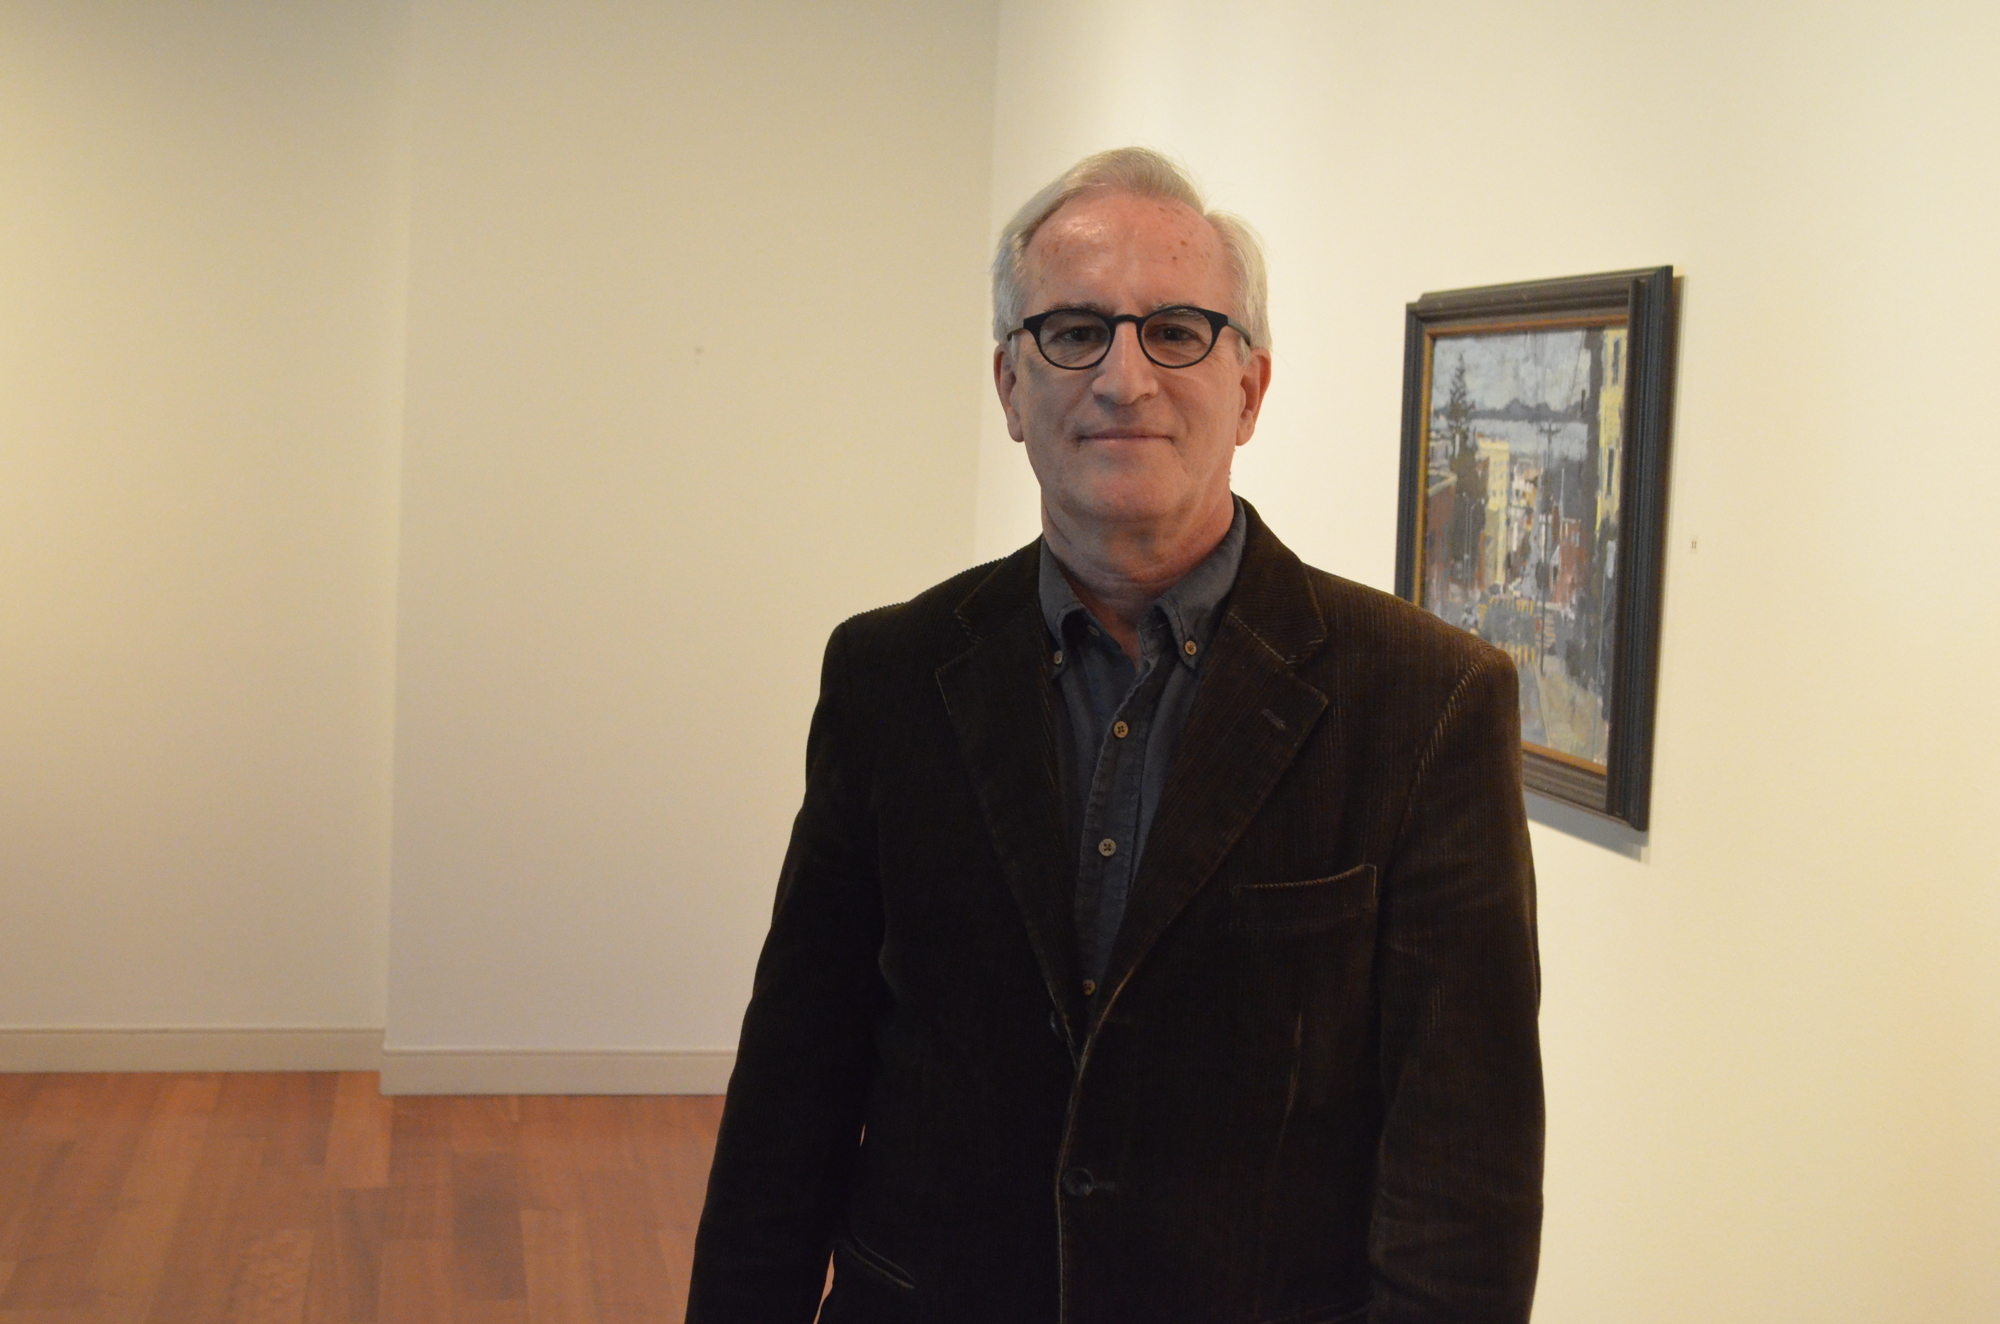 Mark Ormond curated the exhibit with the intent of challenging the perspective of the viewer. Photo by Niki Kottmann.